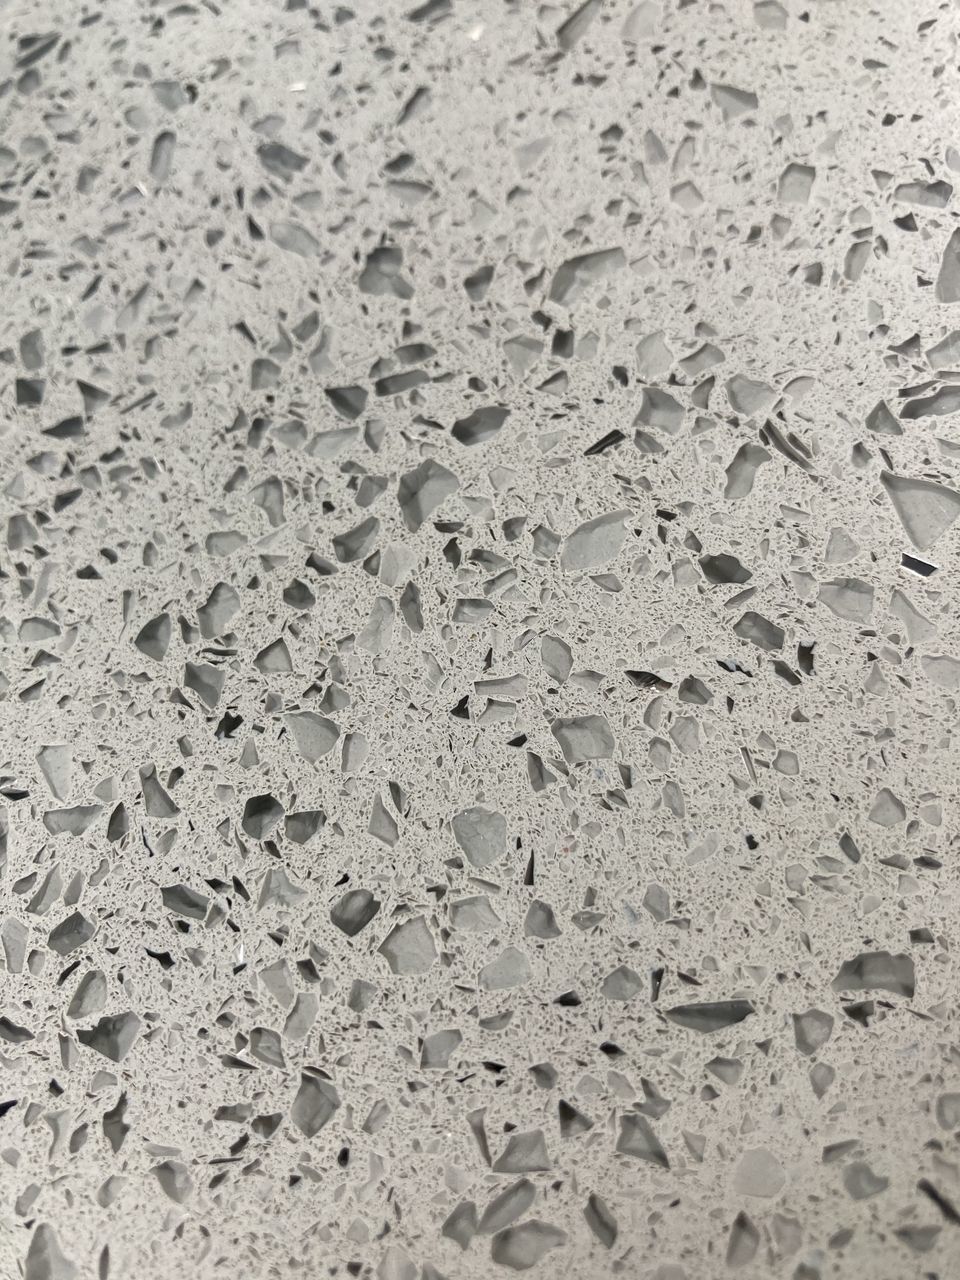 CLOSE-UP OF WET SAND